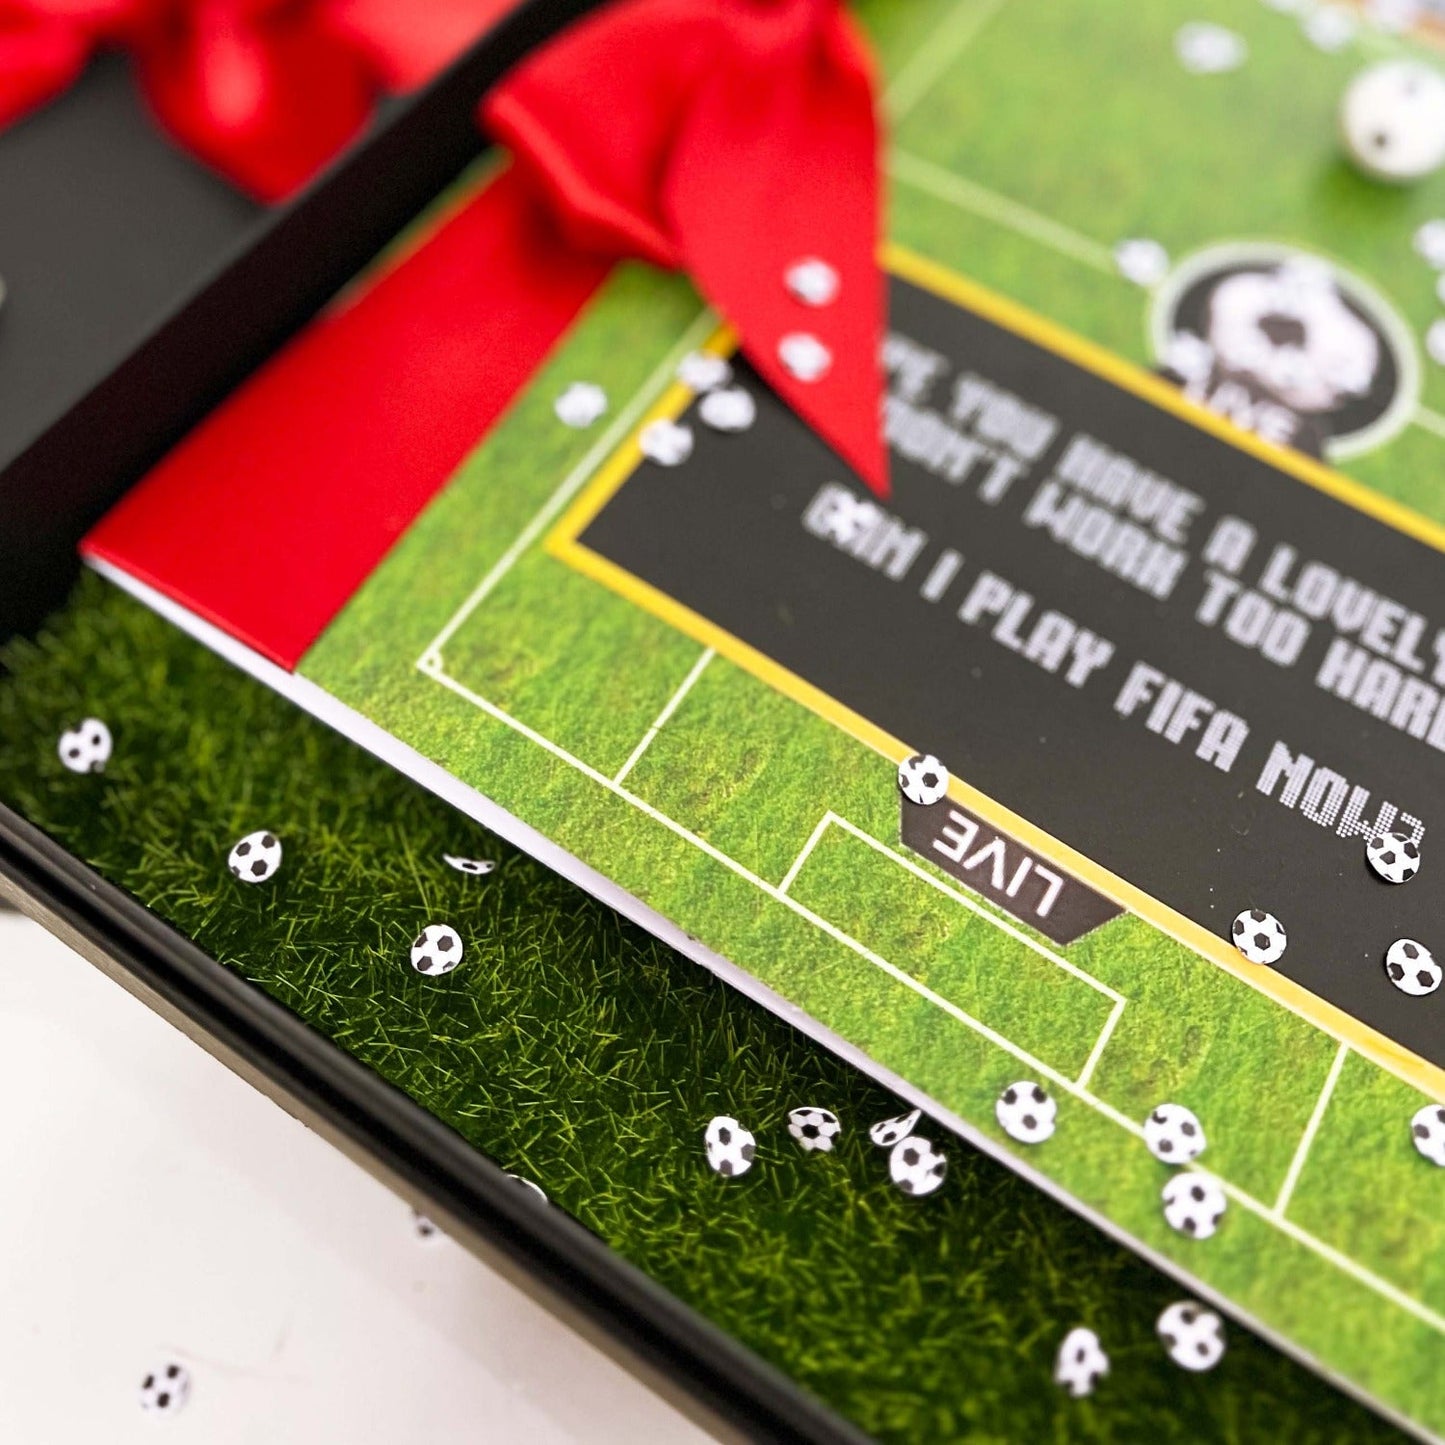 Football Mad Brother Birthday Card Design the ultimate birthday card for the ultimate football fan